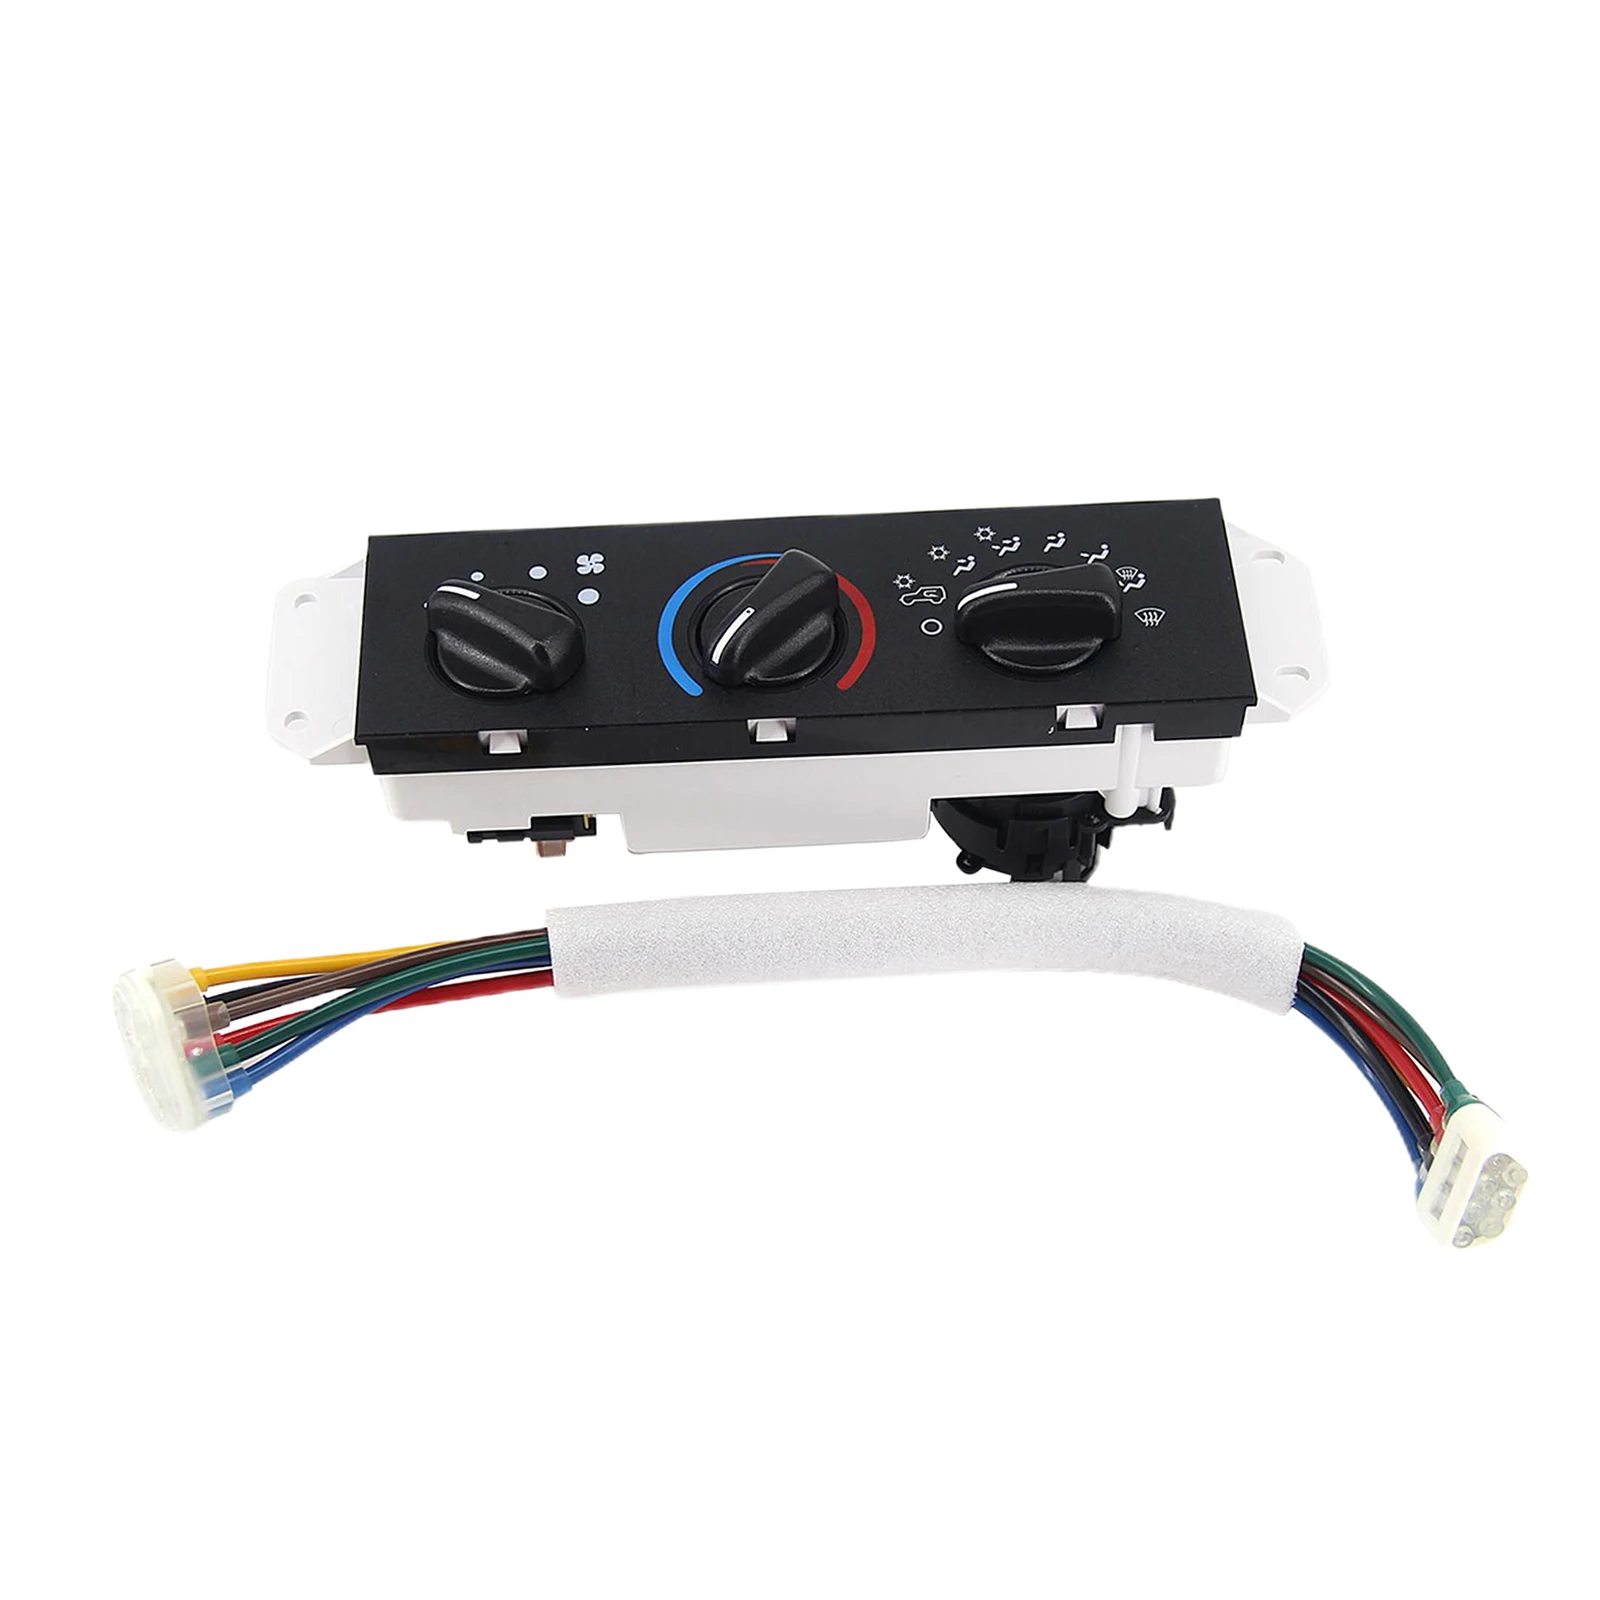 A/C AC Heater Control Unit Selector Climate Control Switch for Jeep Wrangler 1999-01 2002-04